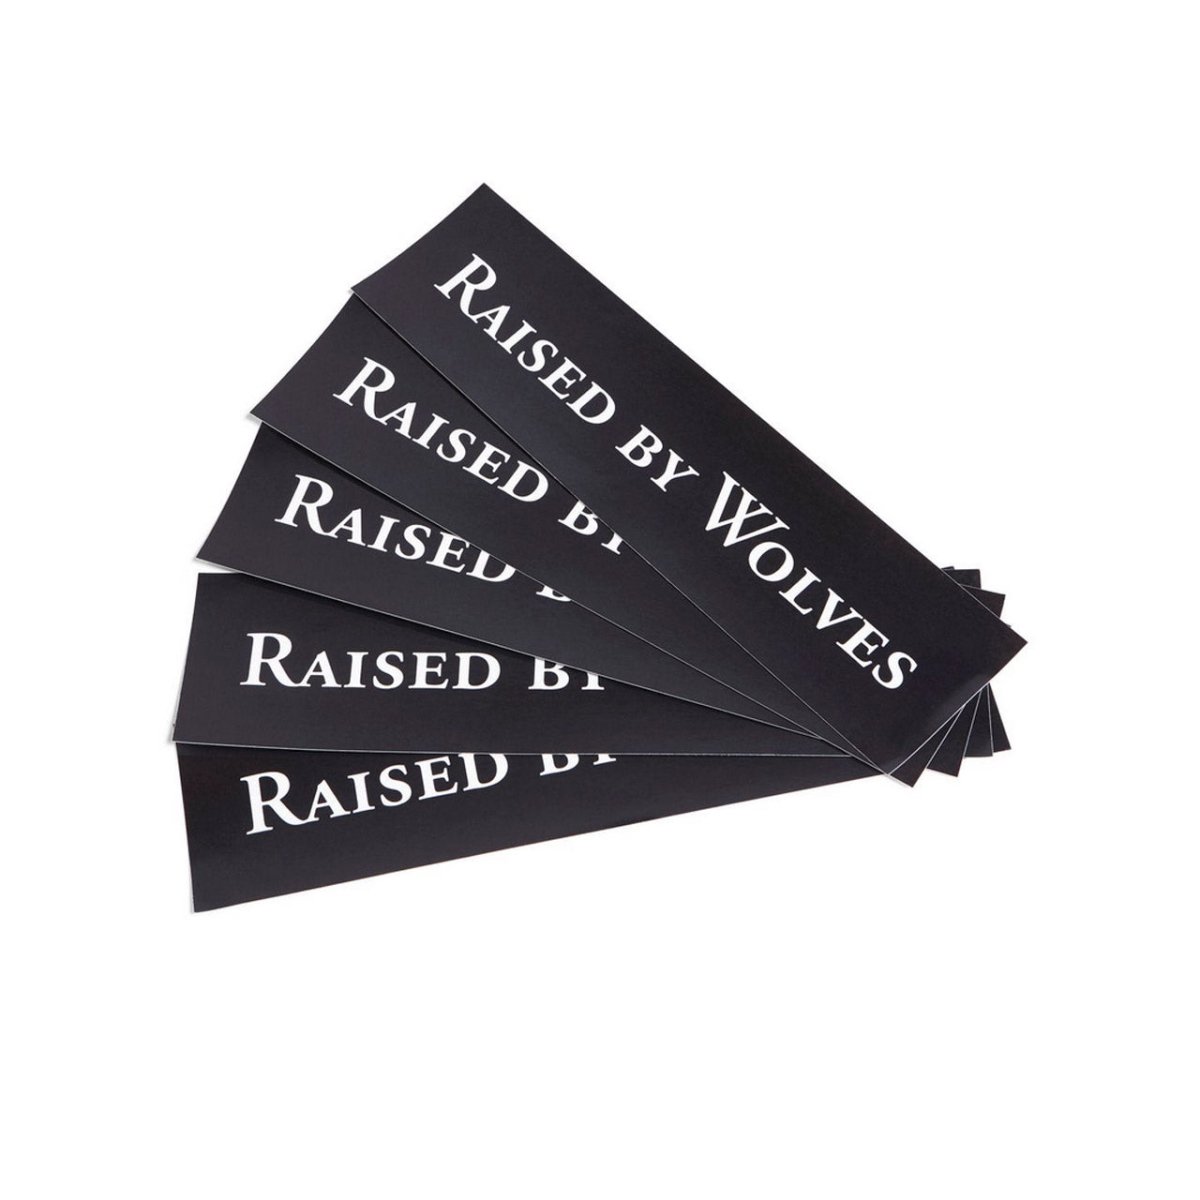 Image of Raised by Wolves Logotype Stickers (5 Pack) (Black)